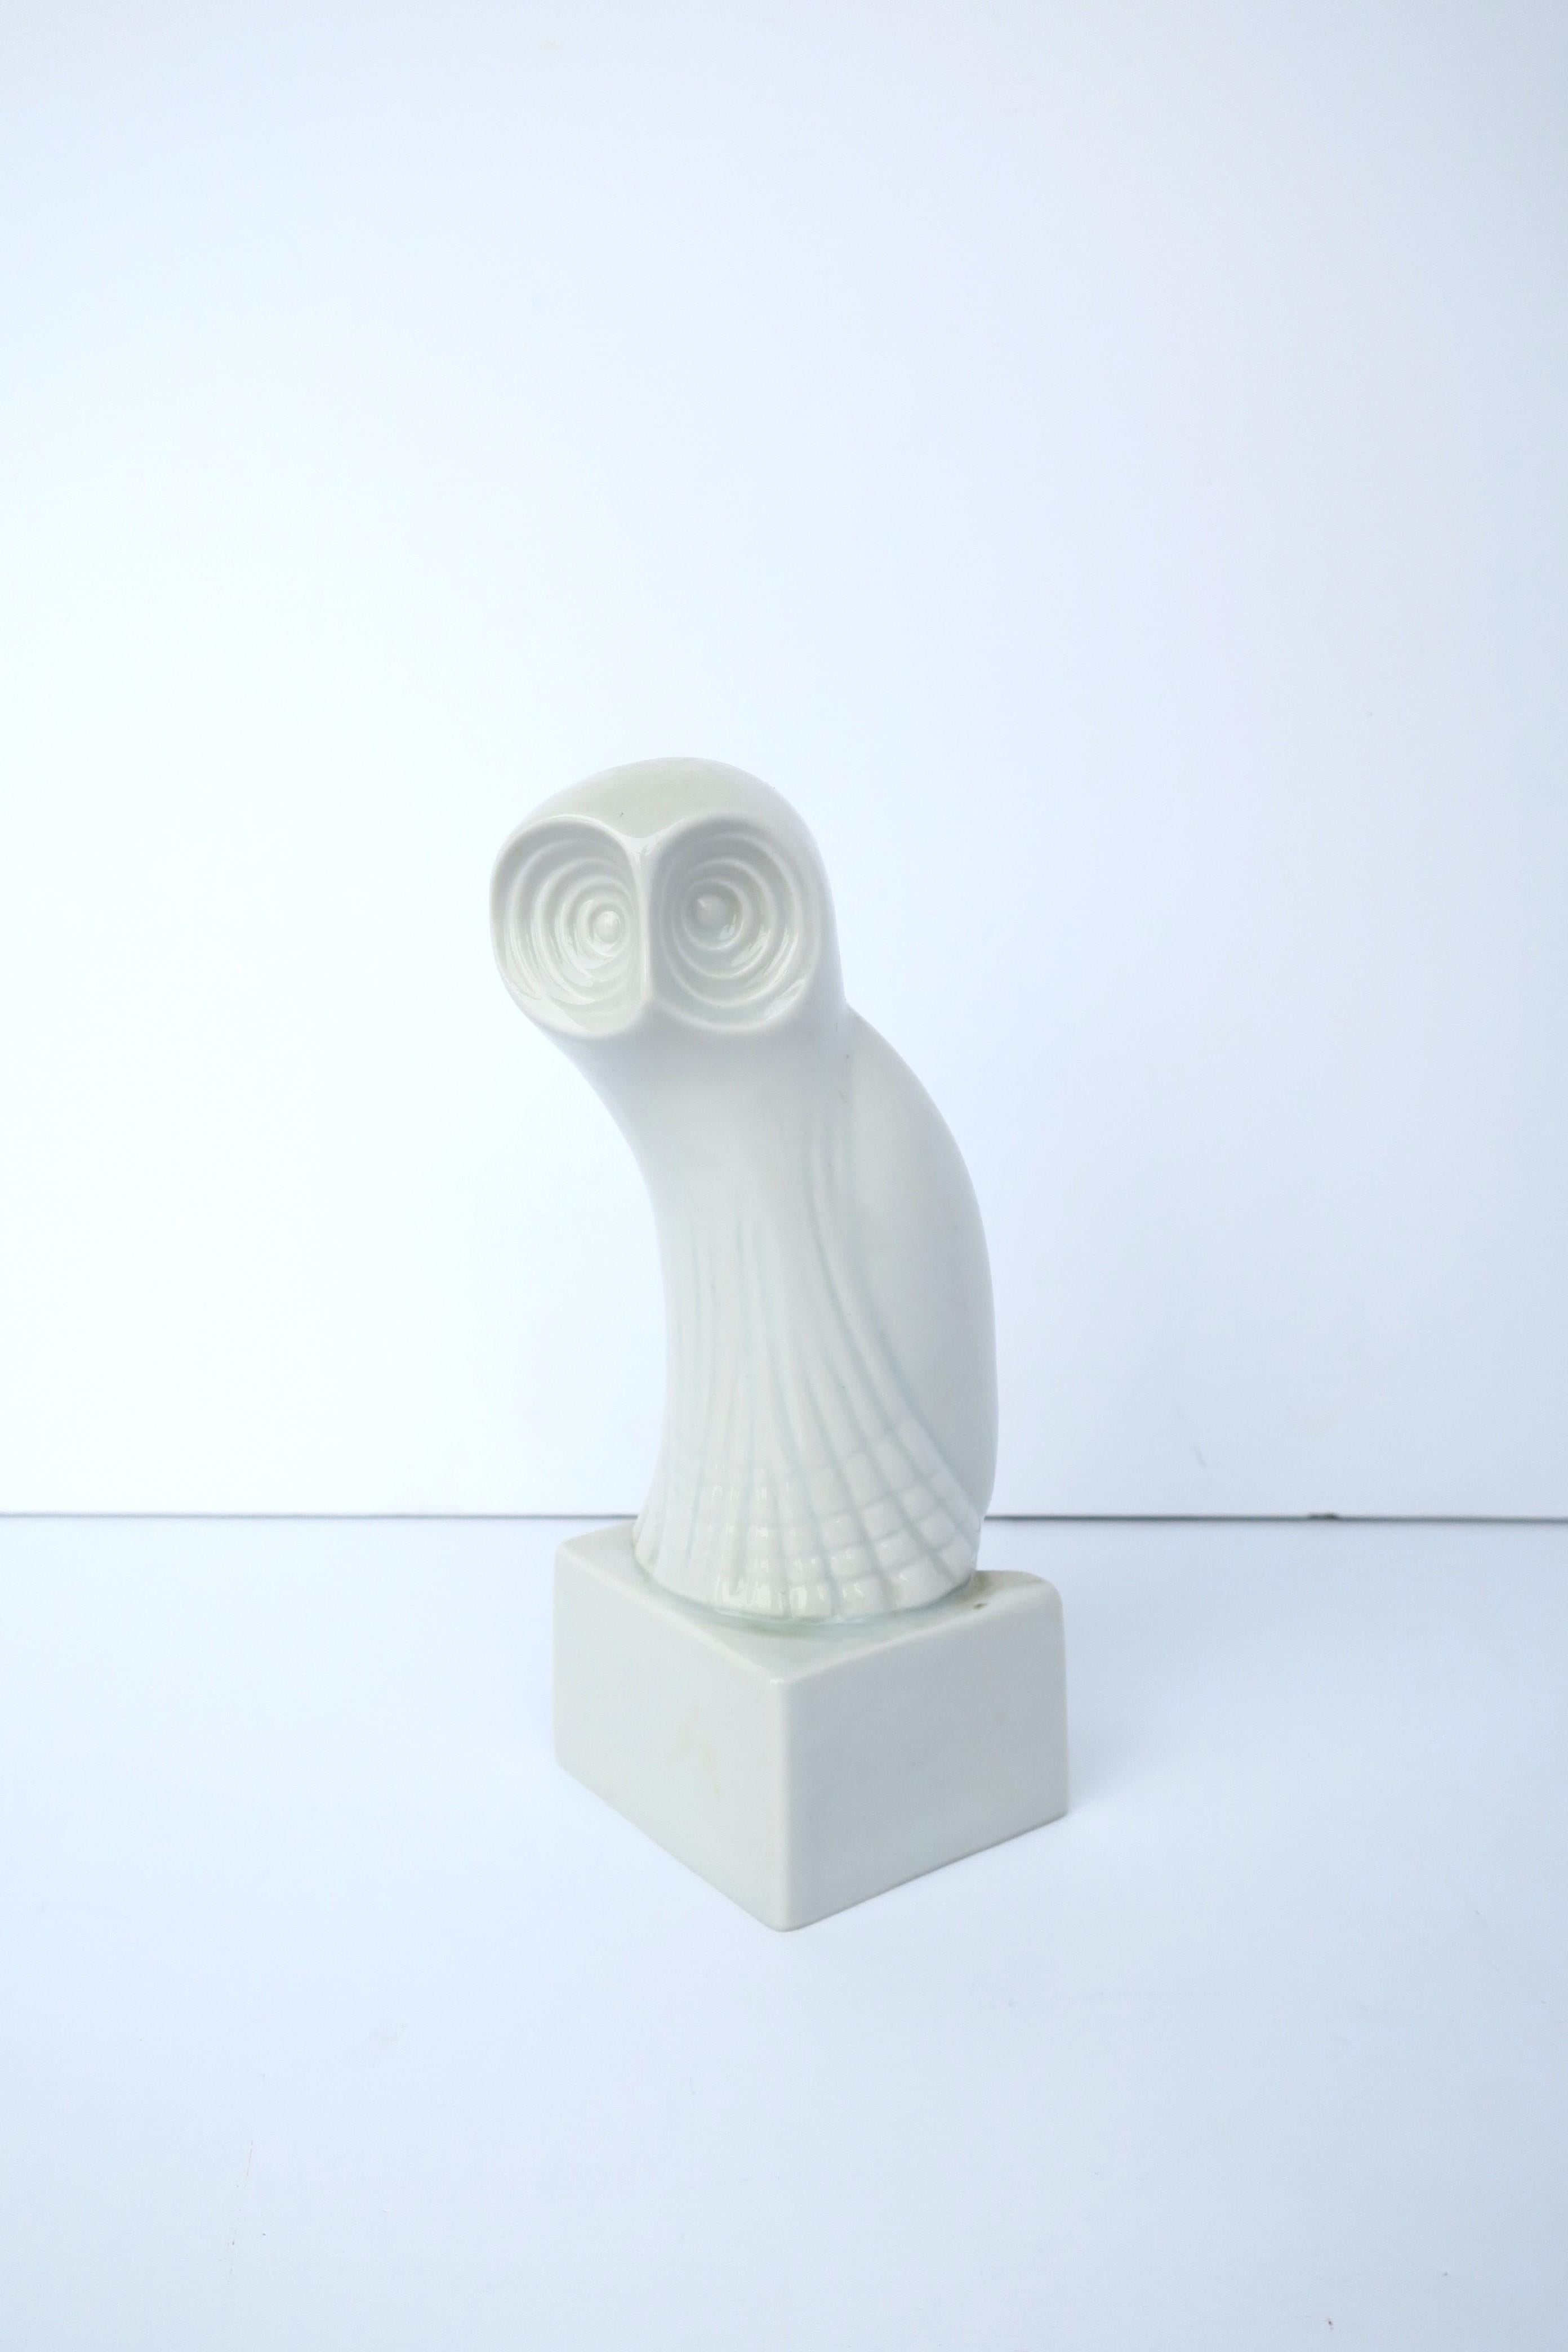 A white porcelain owl bird, Mid-Century Modern period, by Royal Dux Bohemia, circa mid-20th century, Czechoslovakia. With makers' mark on underside as shown in last image. A great piece for a bookshelf, table, etc. Dimensions: 6.88